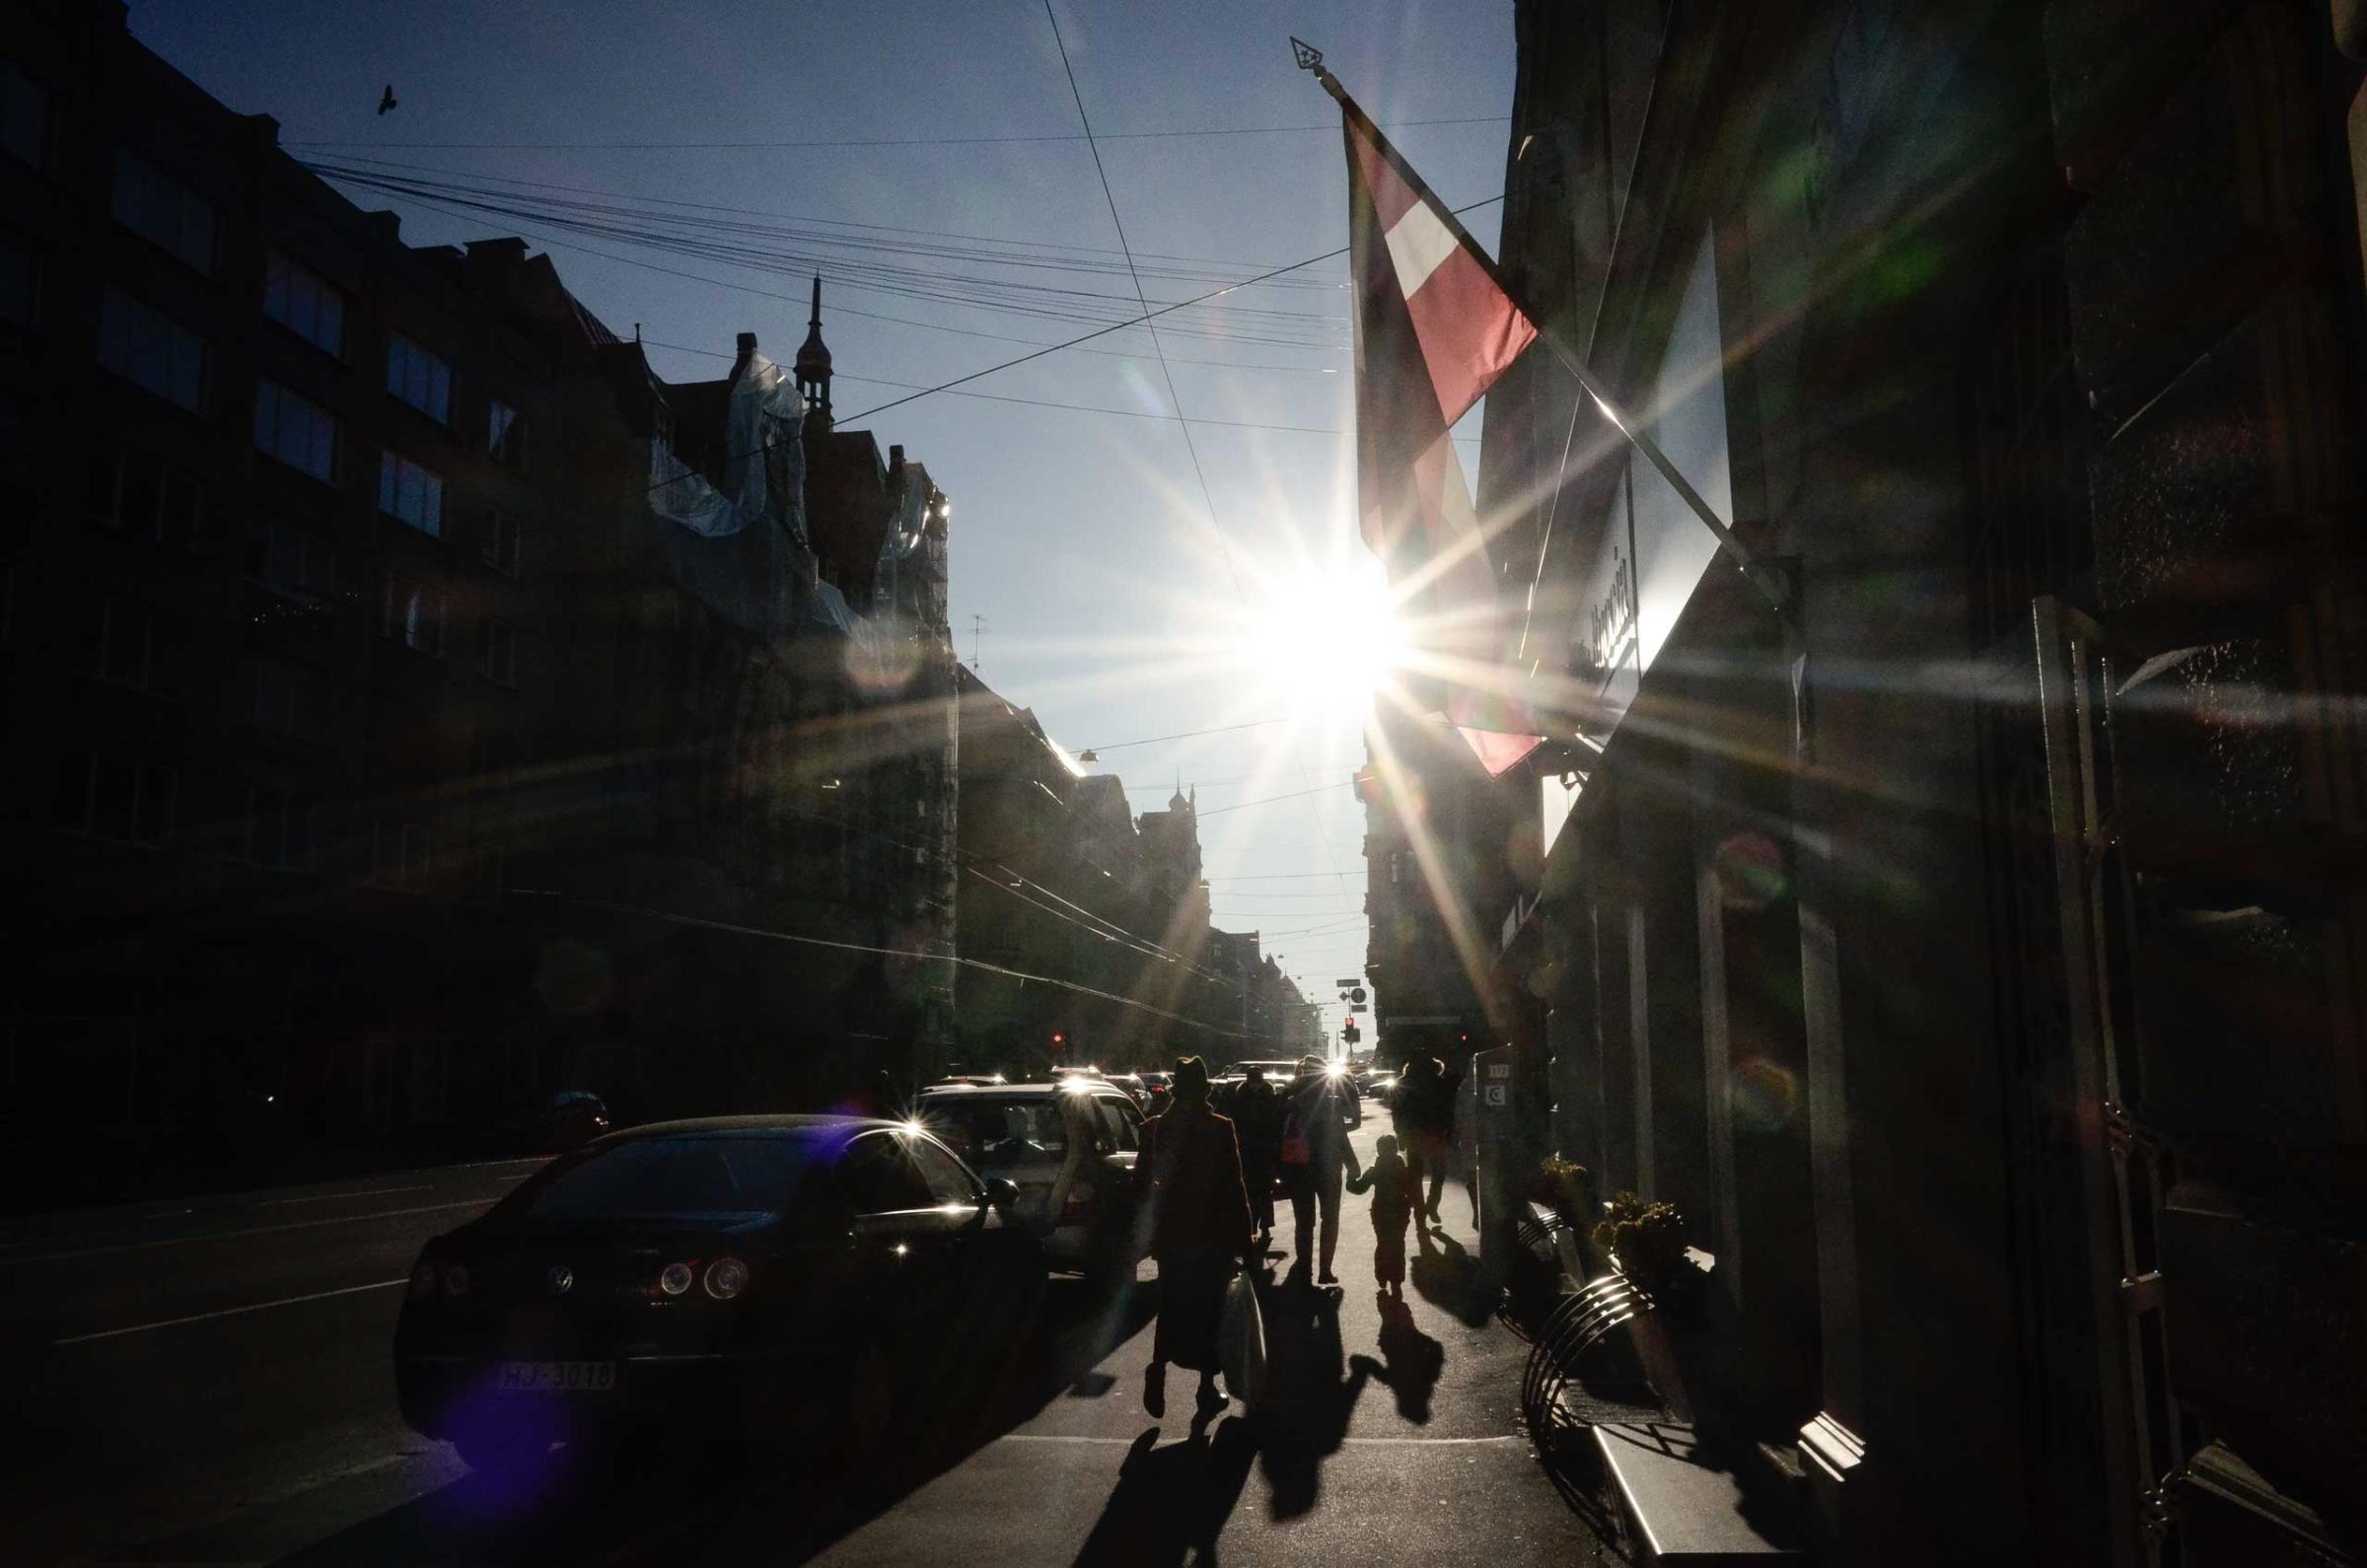 A street scene in downtown, Riga, Latvia, October 23, 2014, where tensions are high due to Moscow’s threatening rhetoric in support of ethnic Russians in the Baltics. Latvia’s NATO allies have committed to keep a continued presence near Russia’s borders.